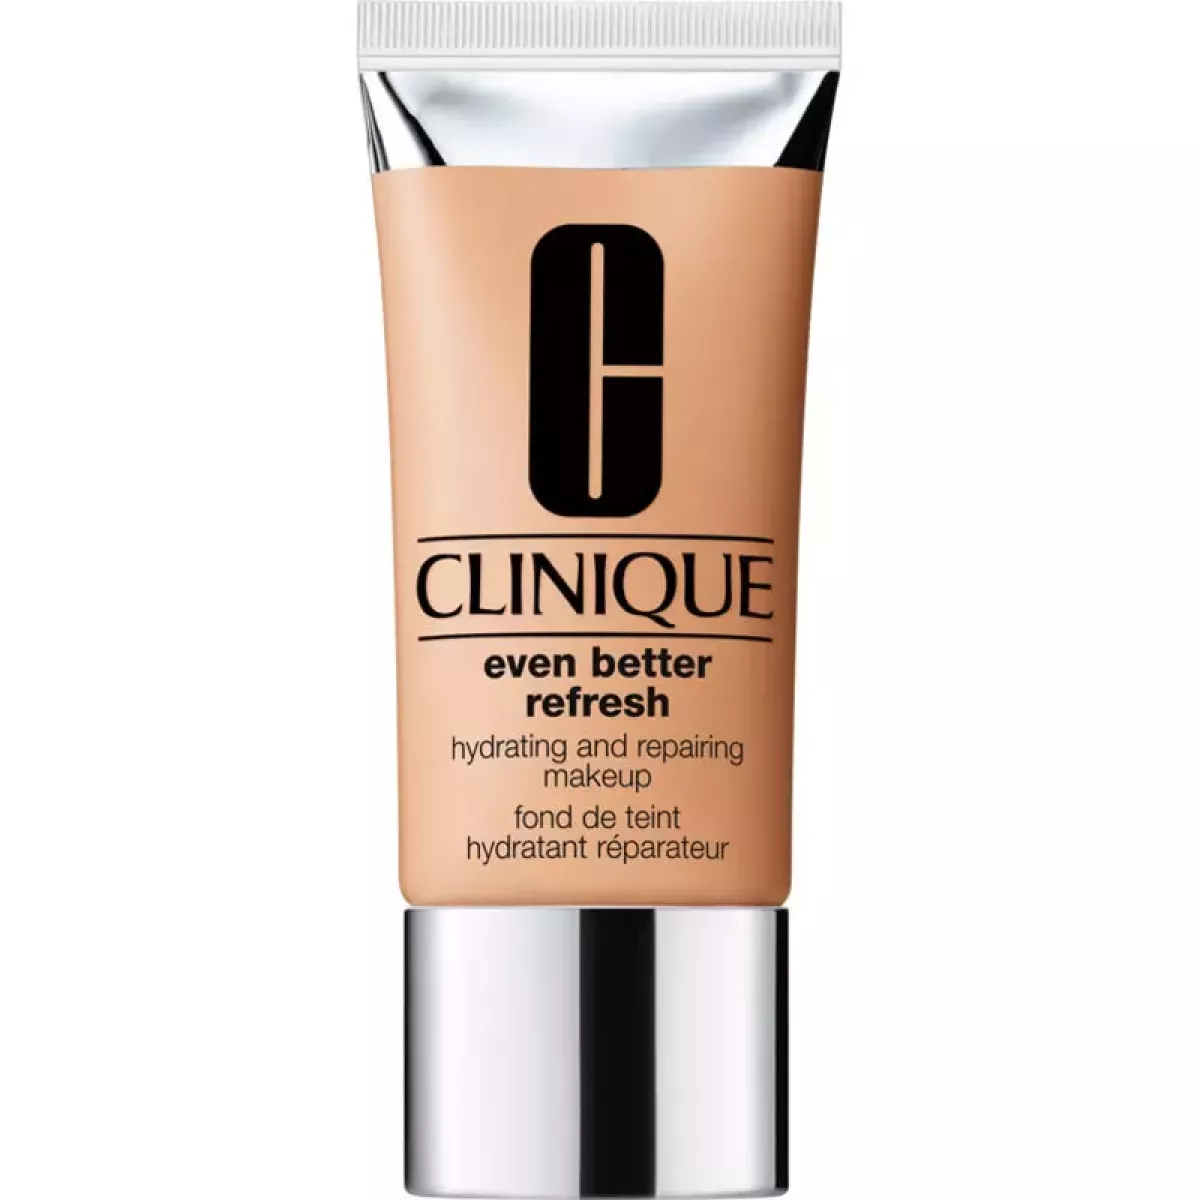 #1 - Clinique Even Better Refresh Hydrating And Repairing Makeup 30 ml - WN 76 Toasted Wheat